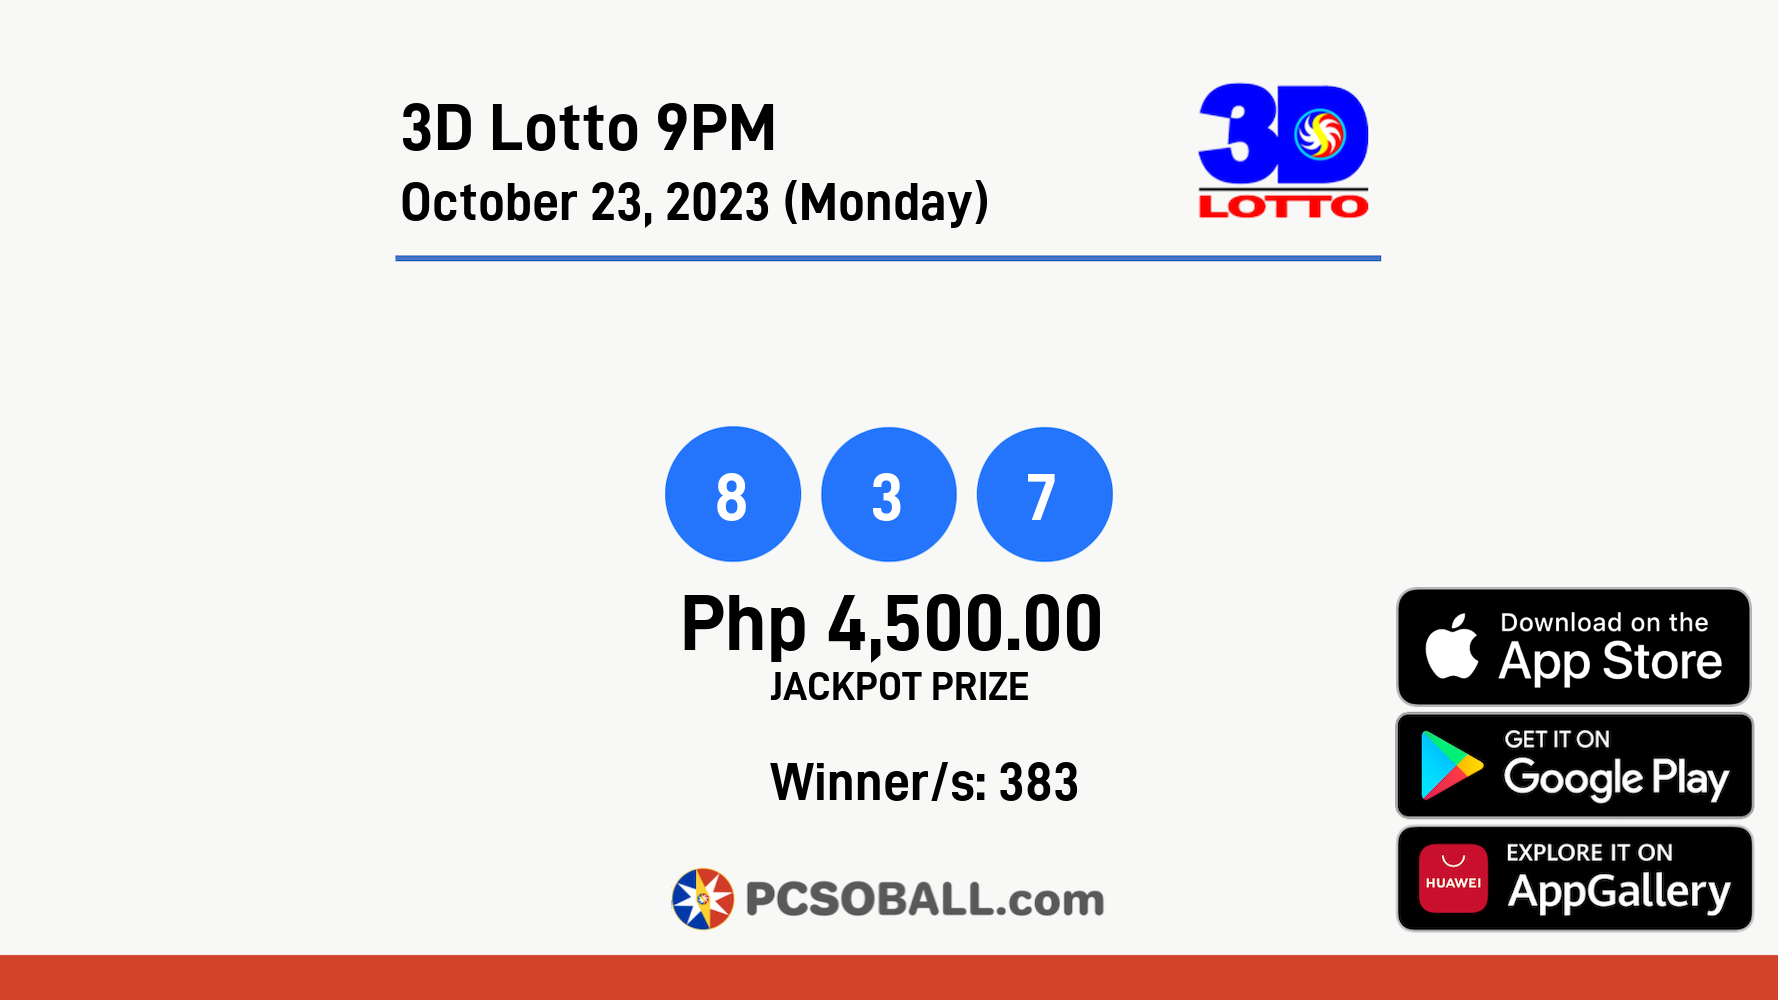 3D Lotto 9PM October 23, 2023 (Monday) Result